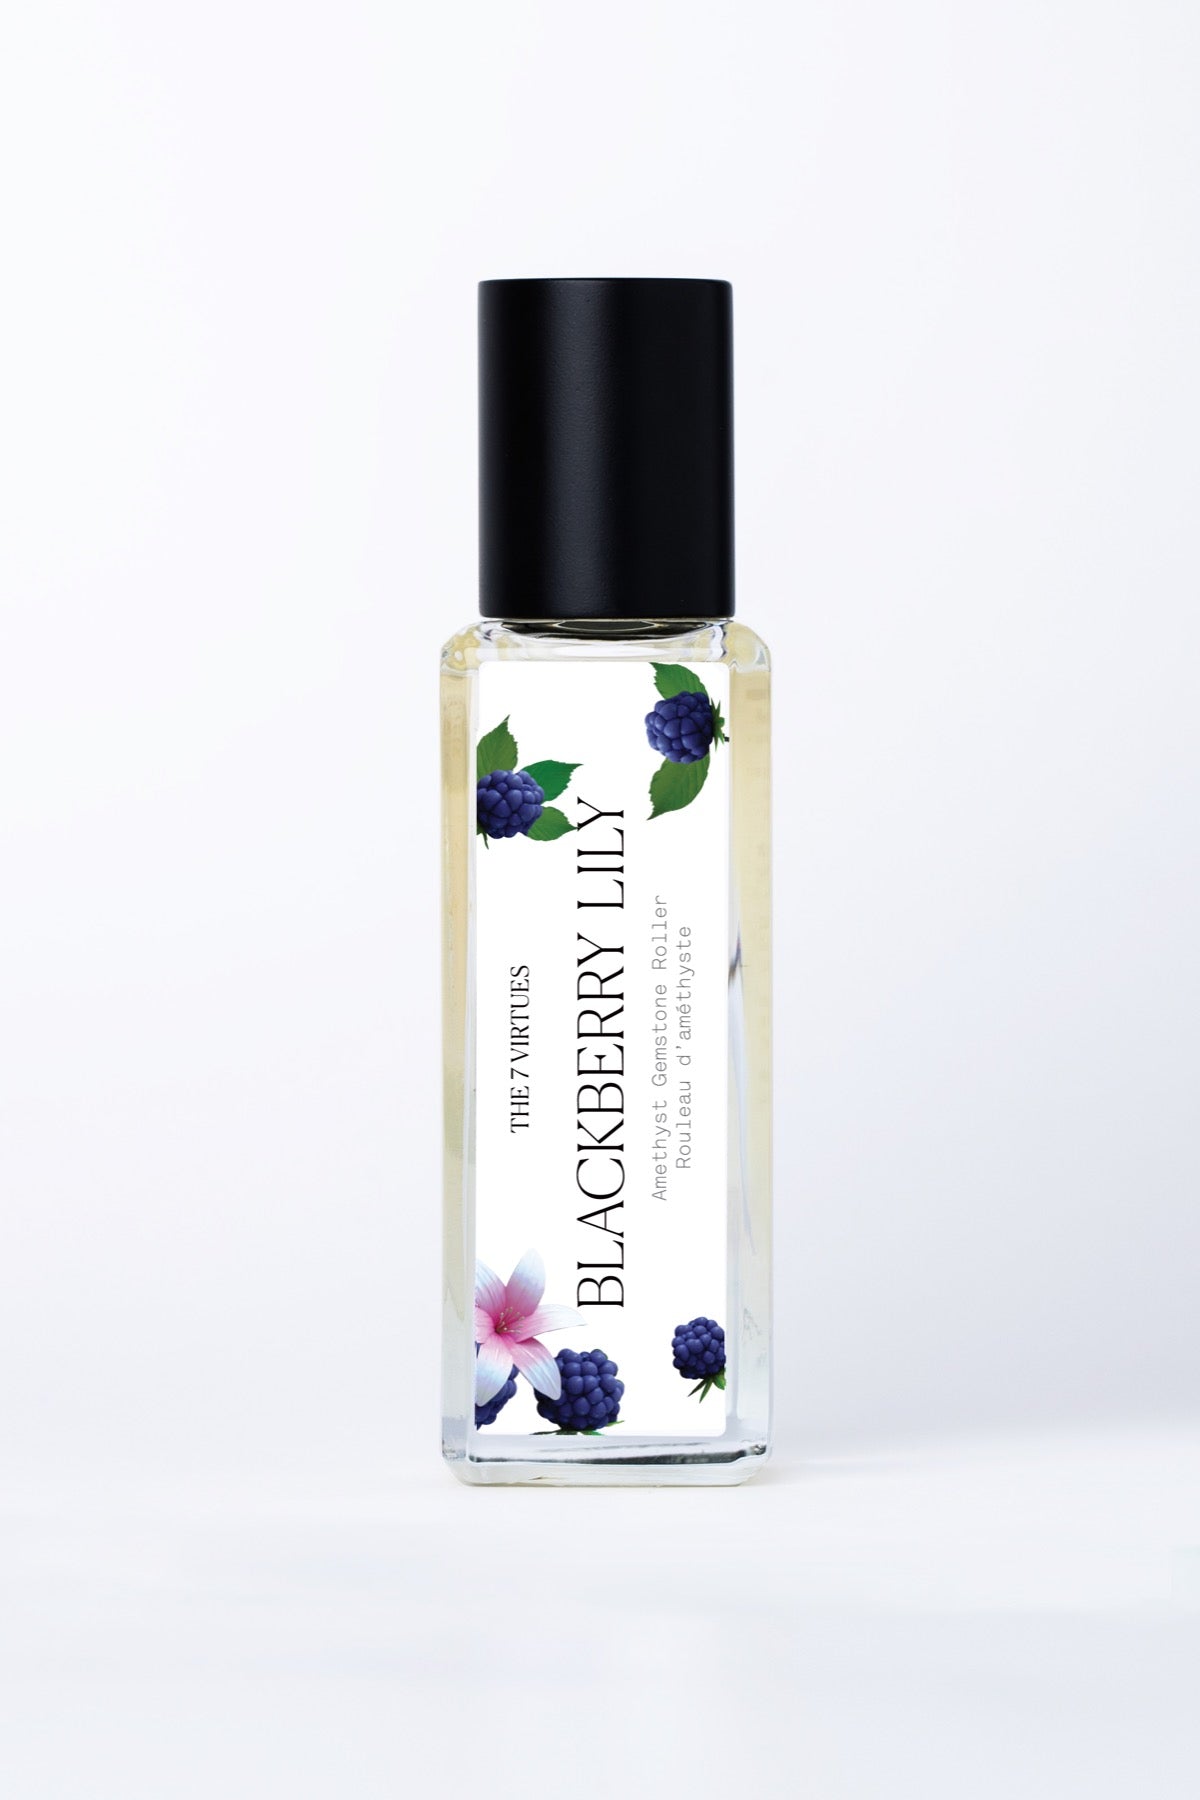 Blackberry Lily Perfume Oil - The 7 Virtues